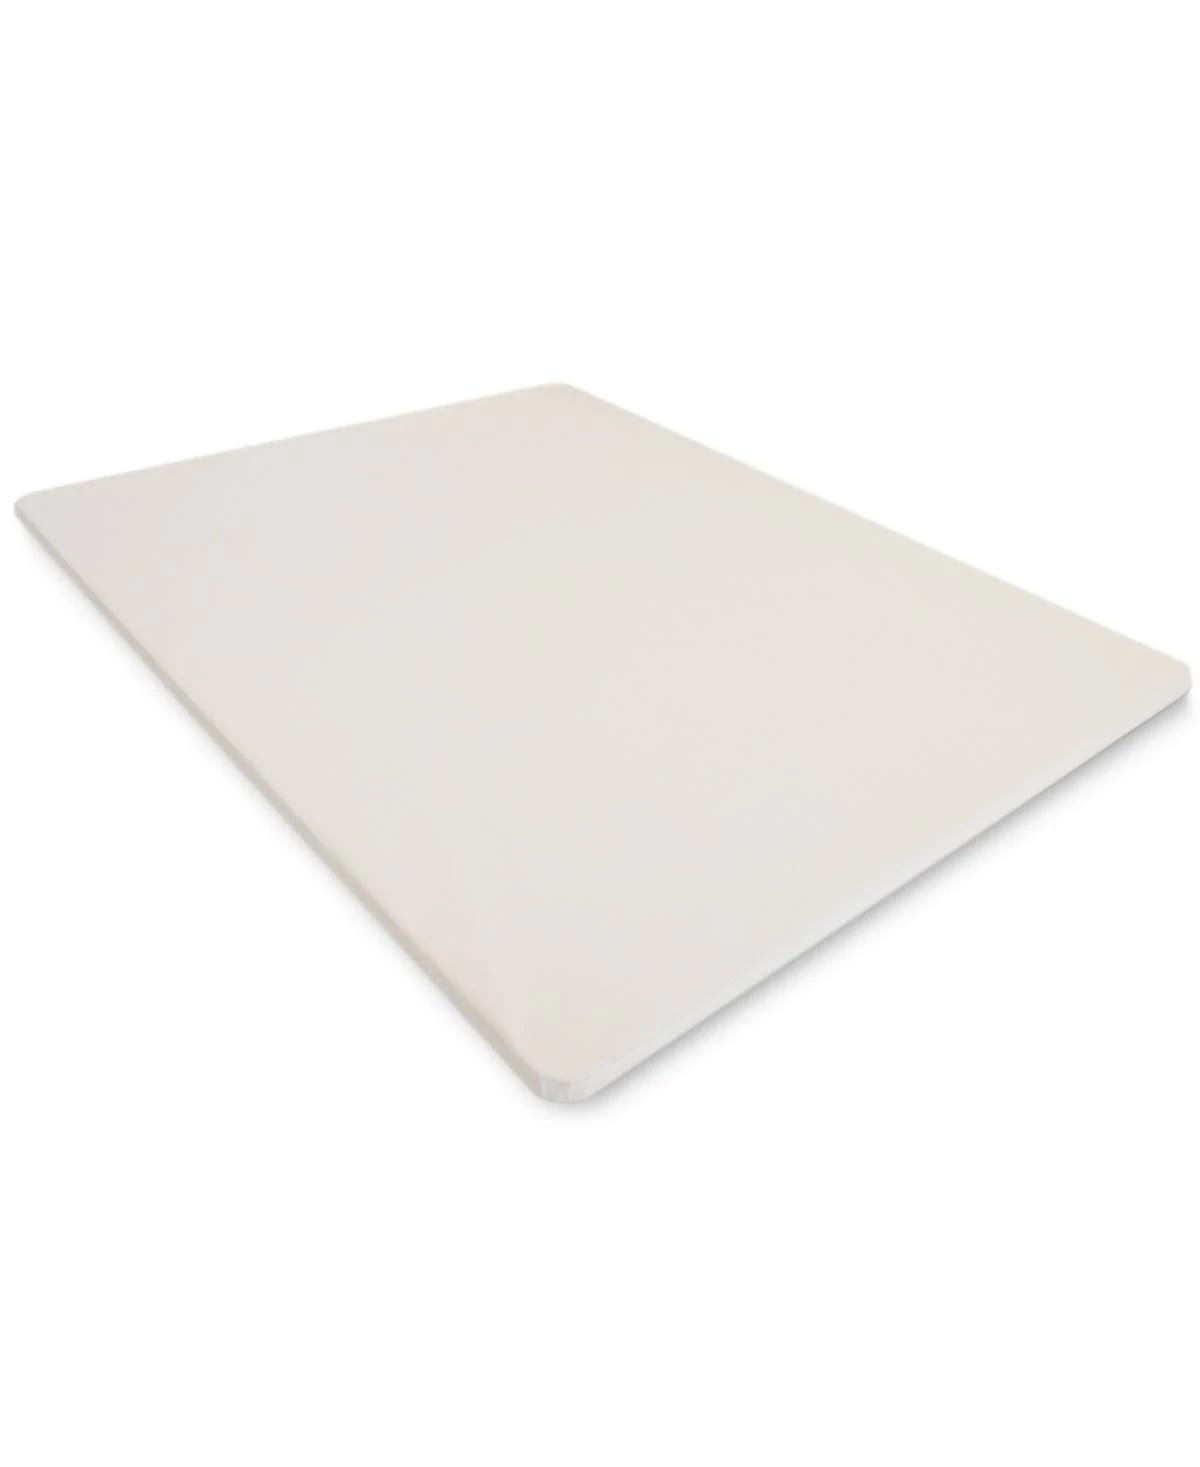 Sealy Full Bunkie Board for Mattress support | Image